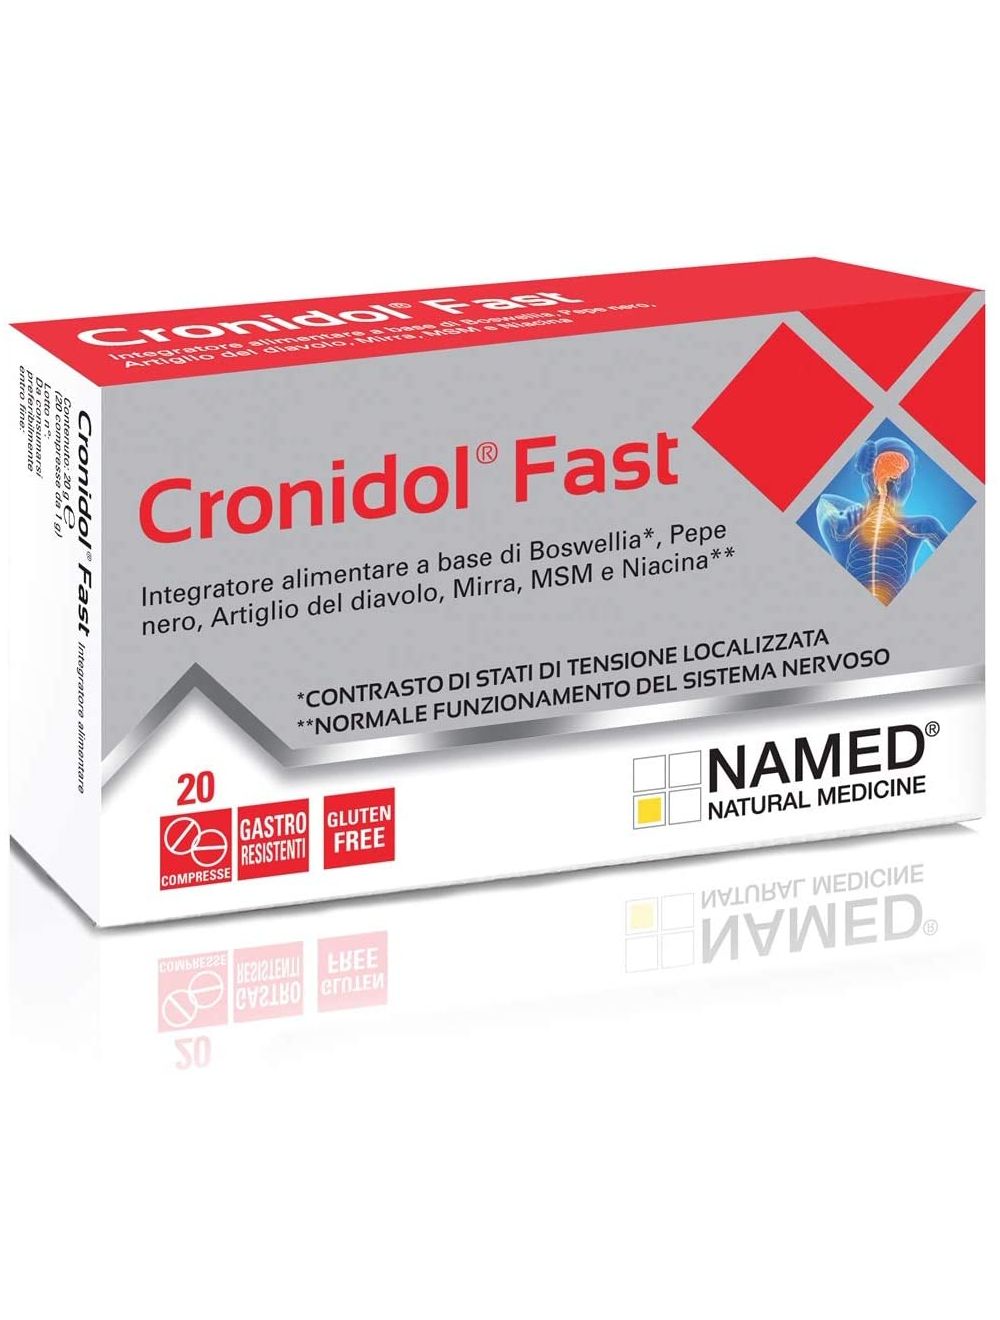 Fast 20 tablets